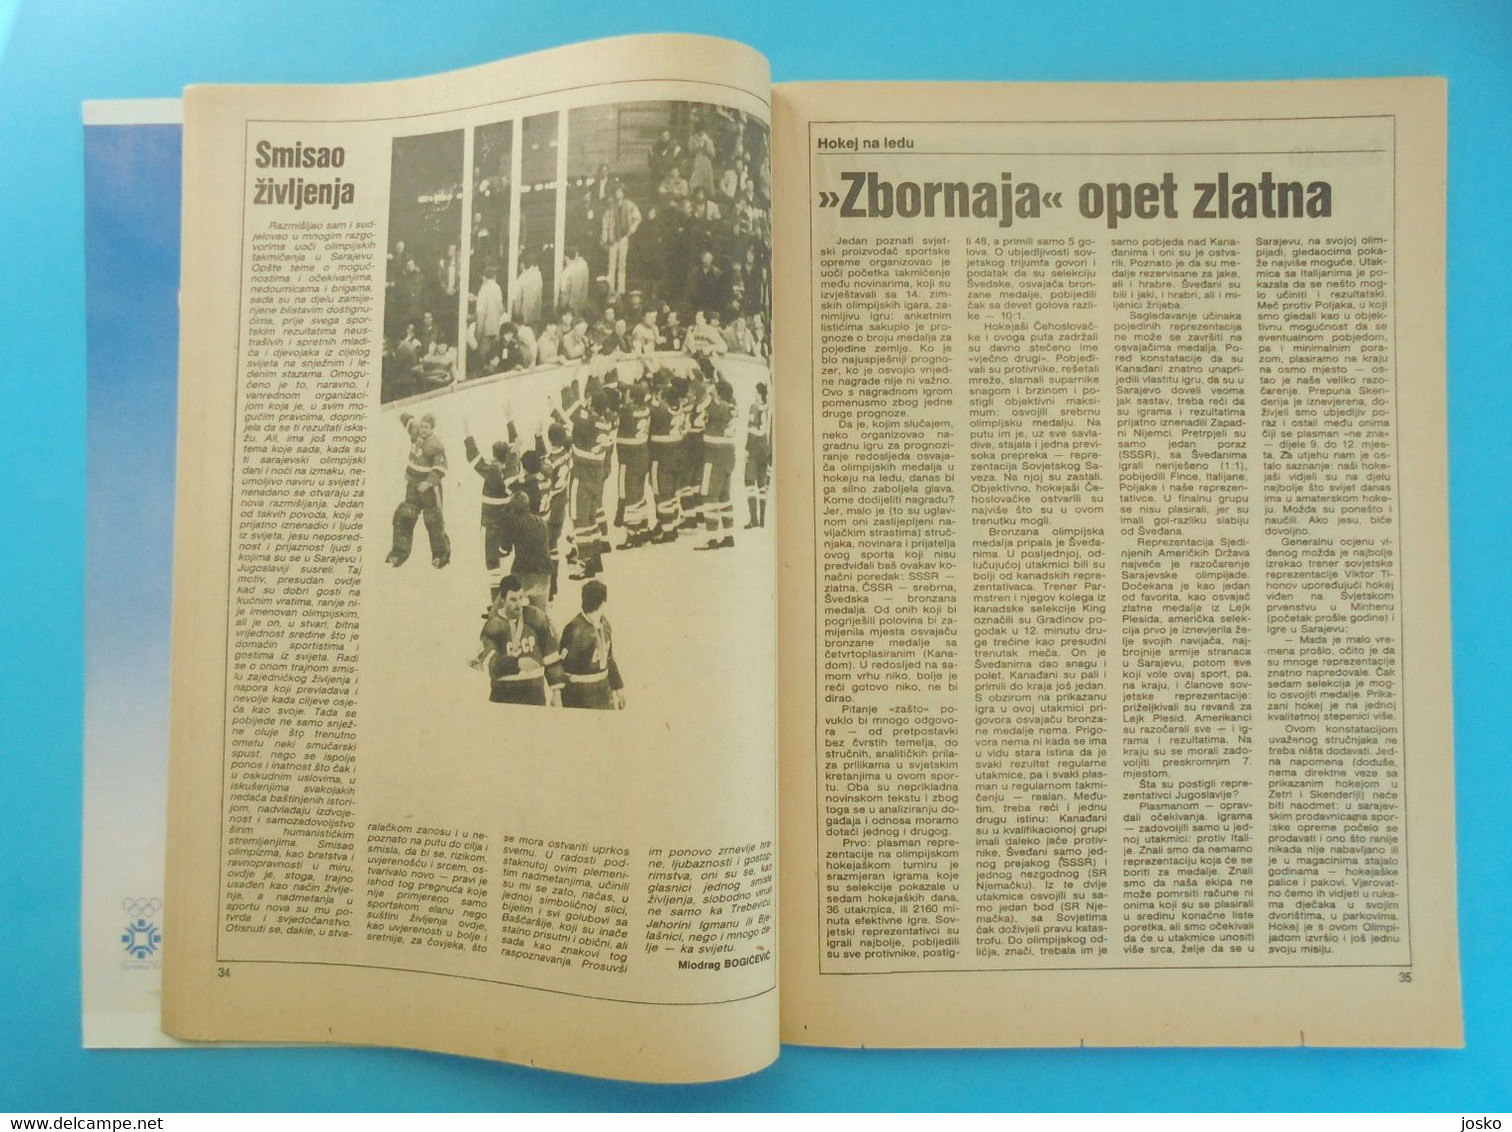 WINTER OLYMPIC GAMES 1984 SARAJEVO ... original vintage magazine - olympic review * Jeux Olympiques Olympia Olympiade